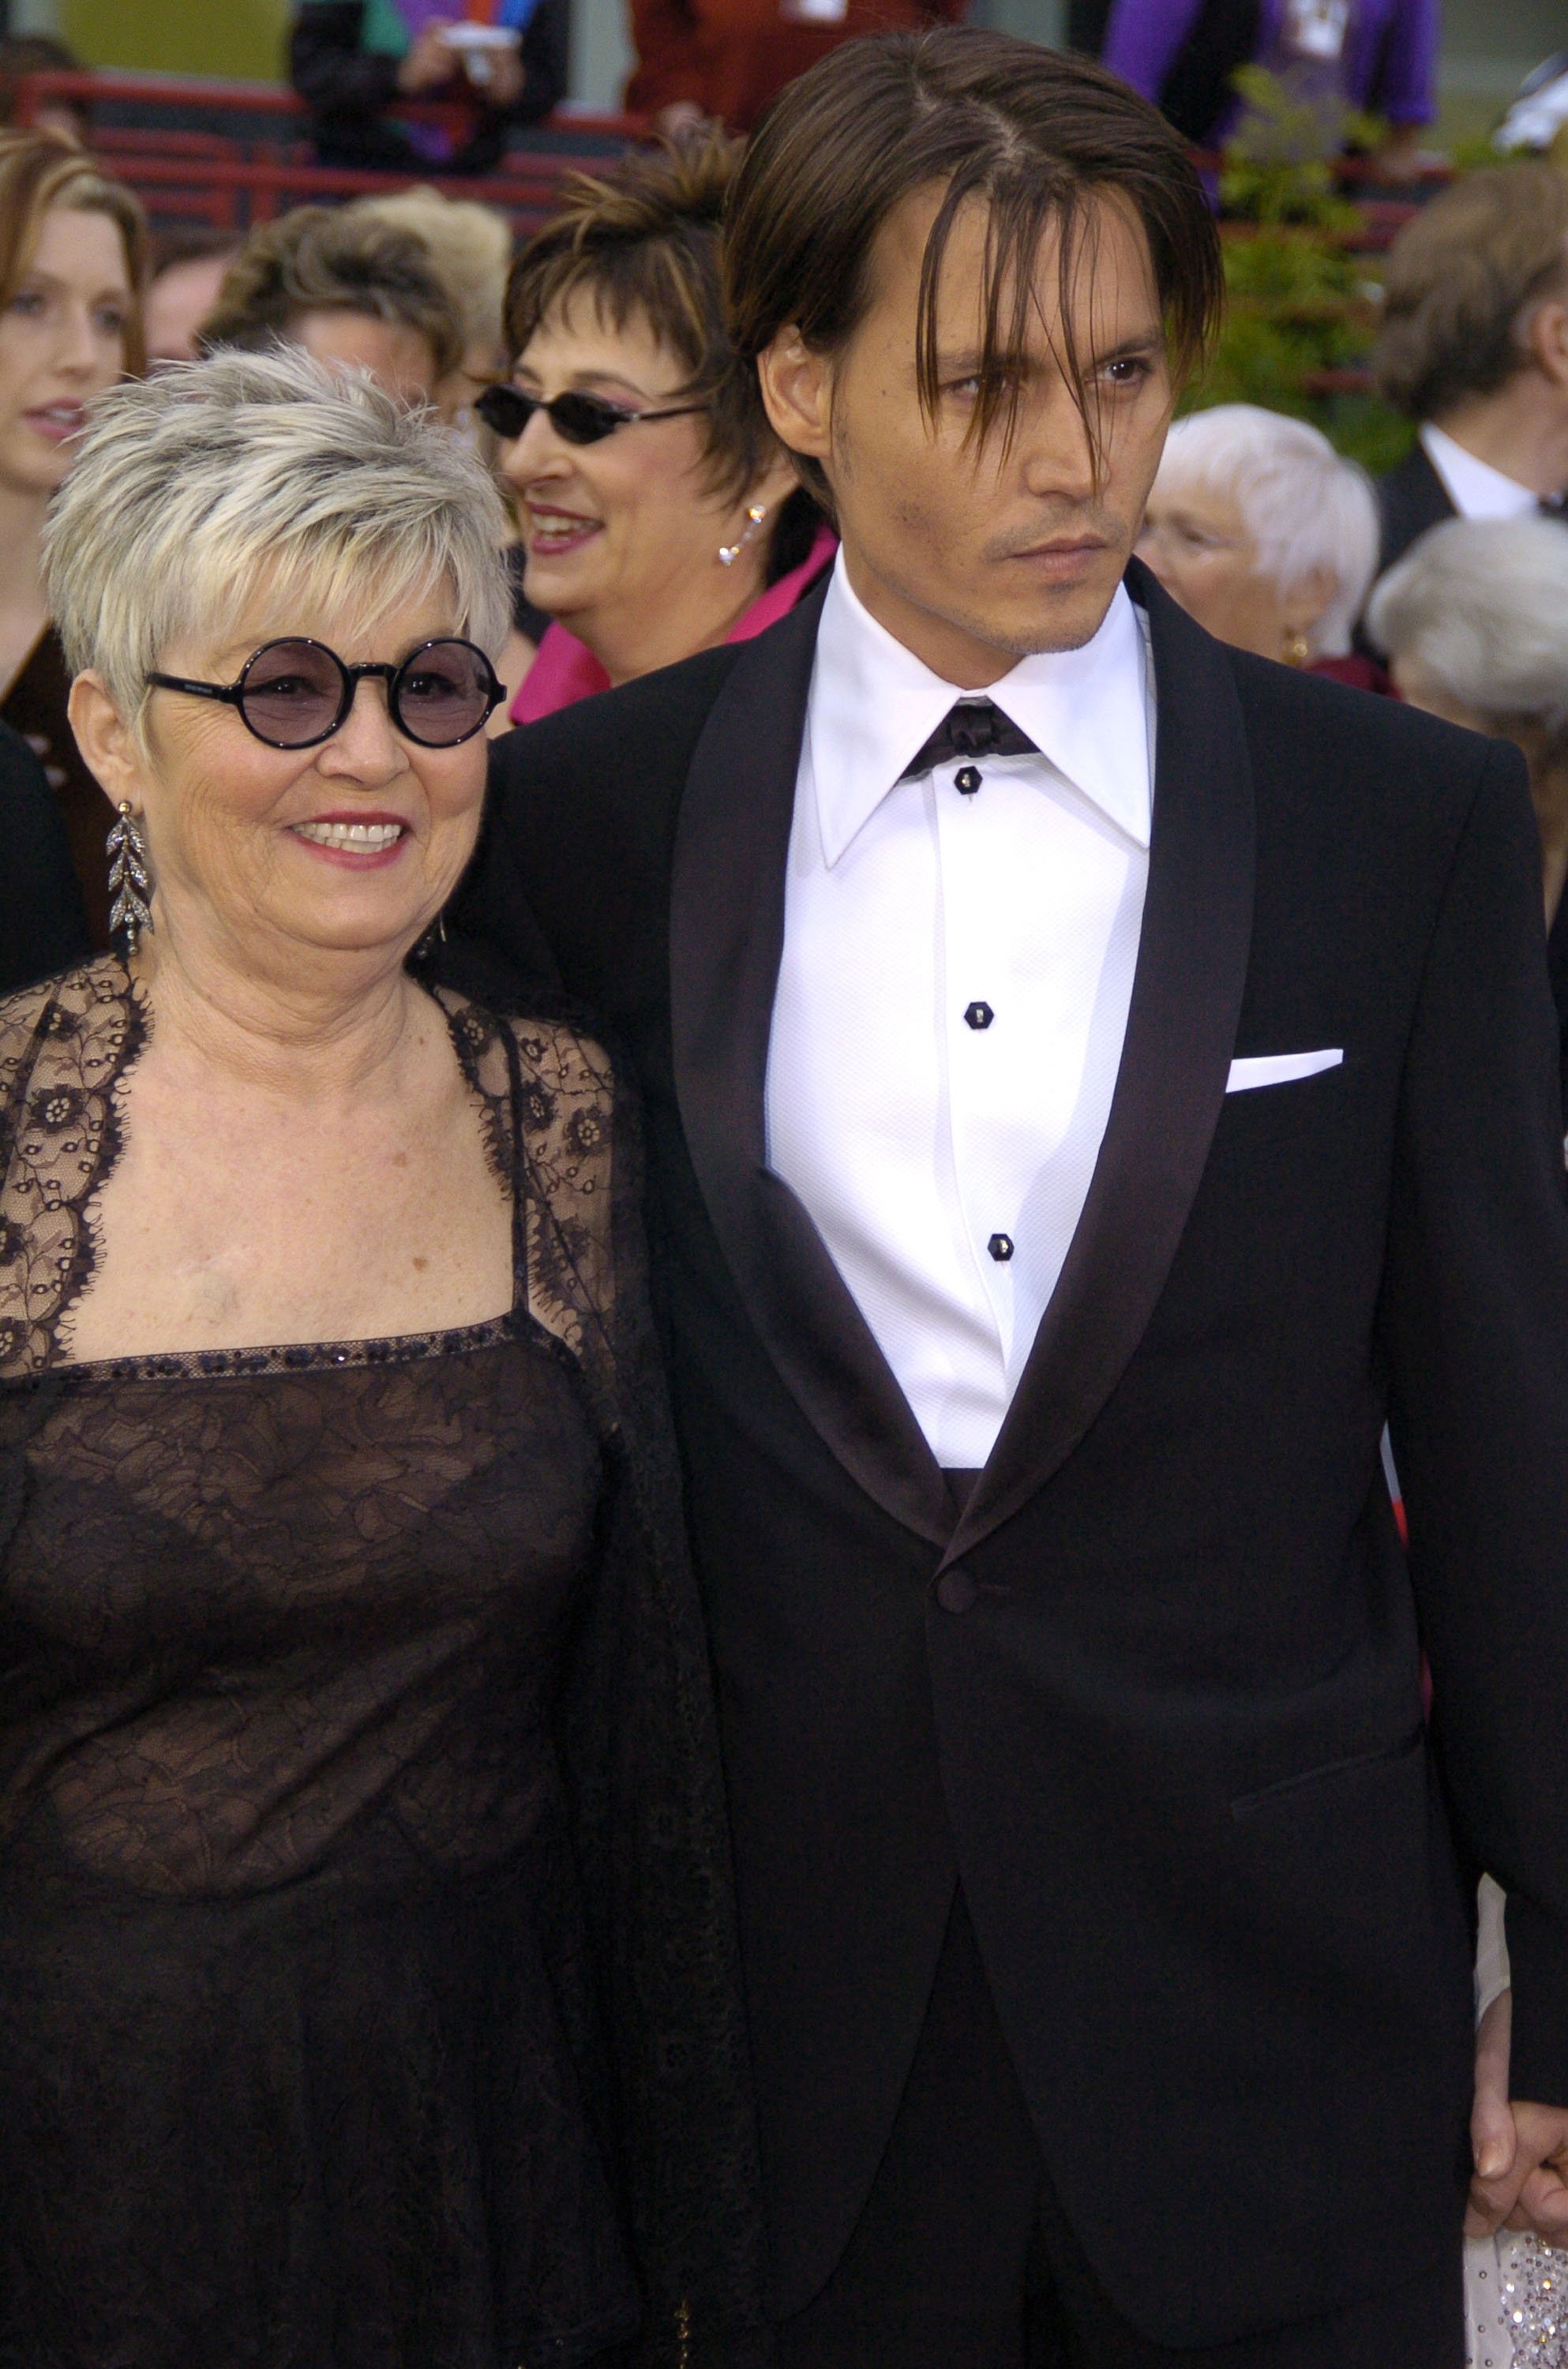 Betty Sue Palmer and Johnny Depp at The 76th Annual Academy Awards in California on February 29, 2004. | Source: Jeff Kravitz/FilmMagic, Inc/Getty Images